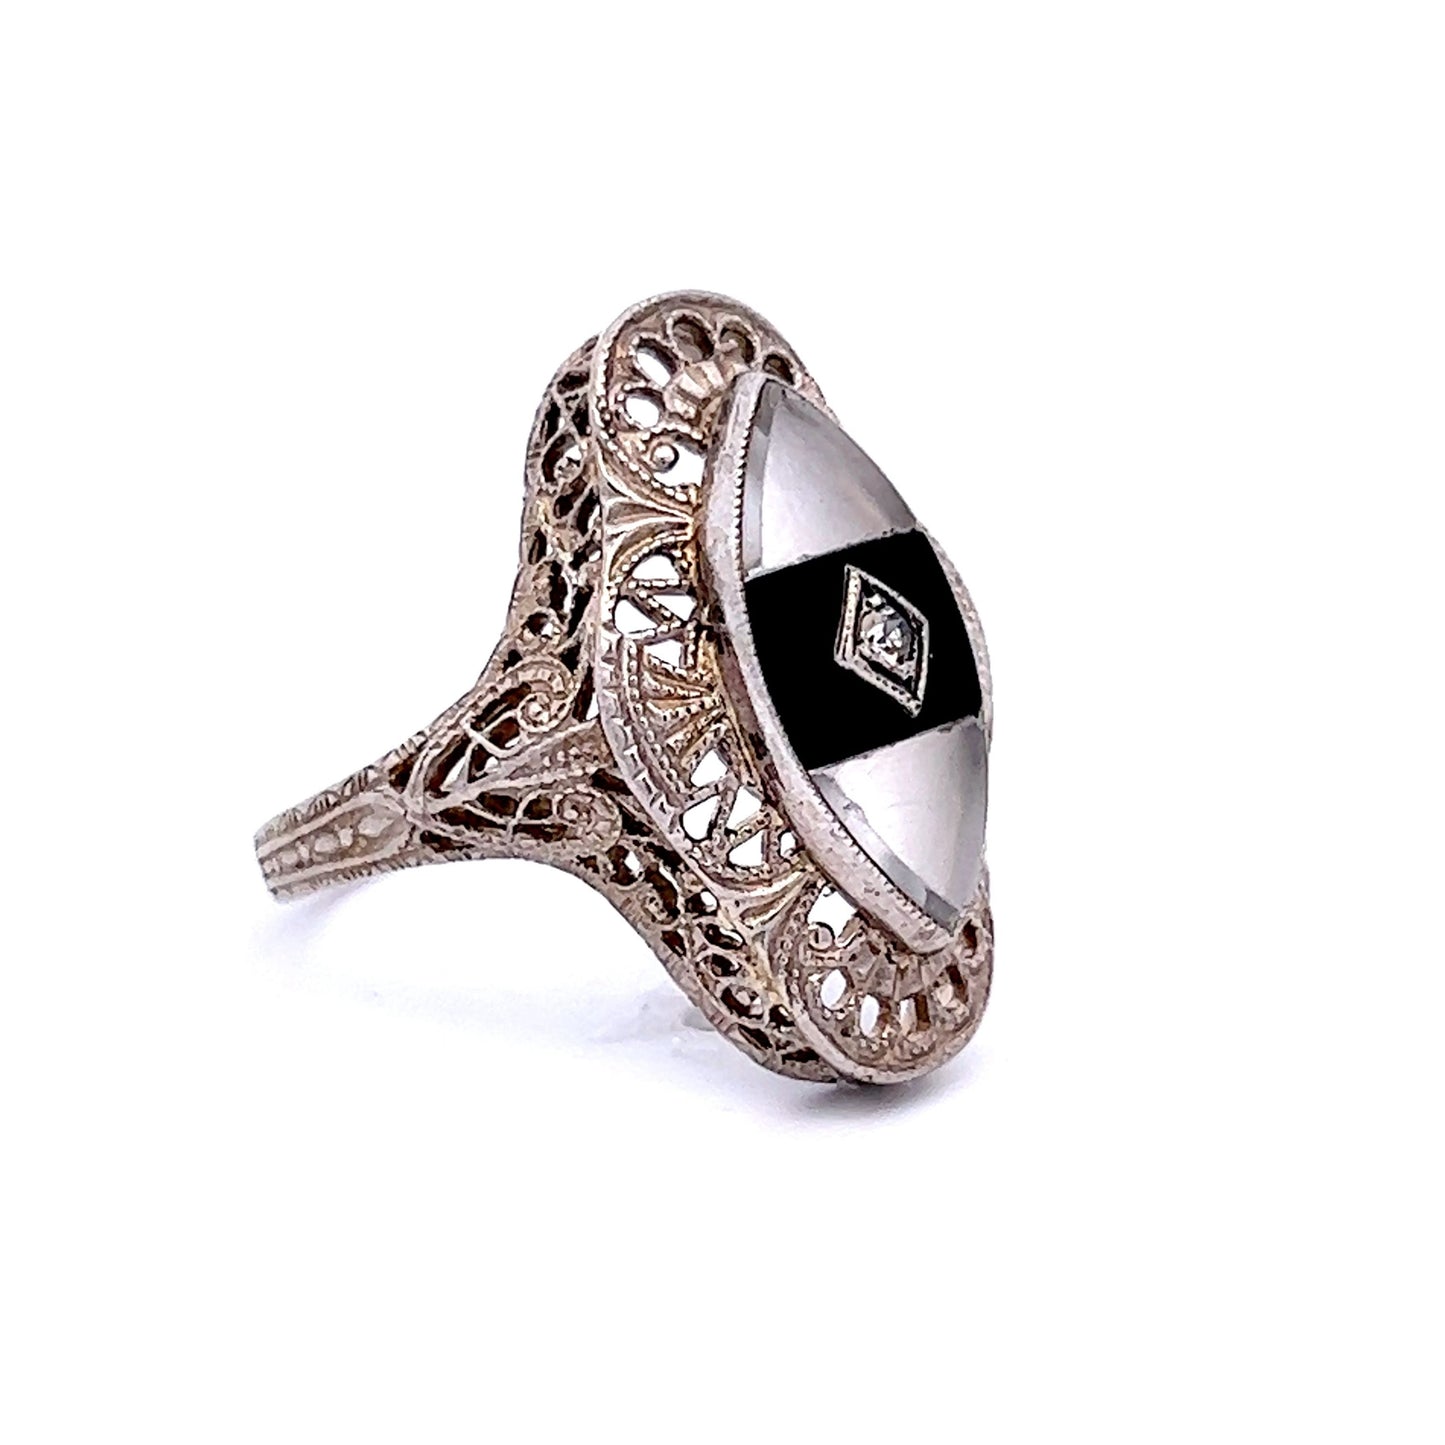 Art Deco Marquise Shaped Onyx and Diamond Ring in 14k White Gold